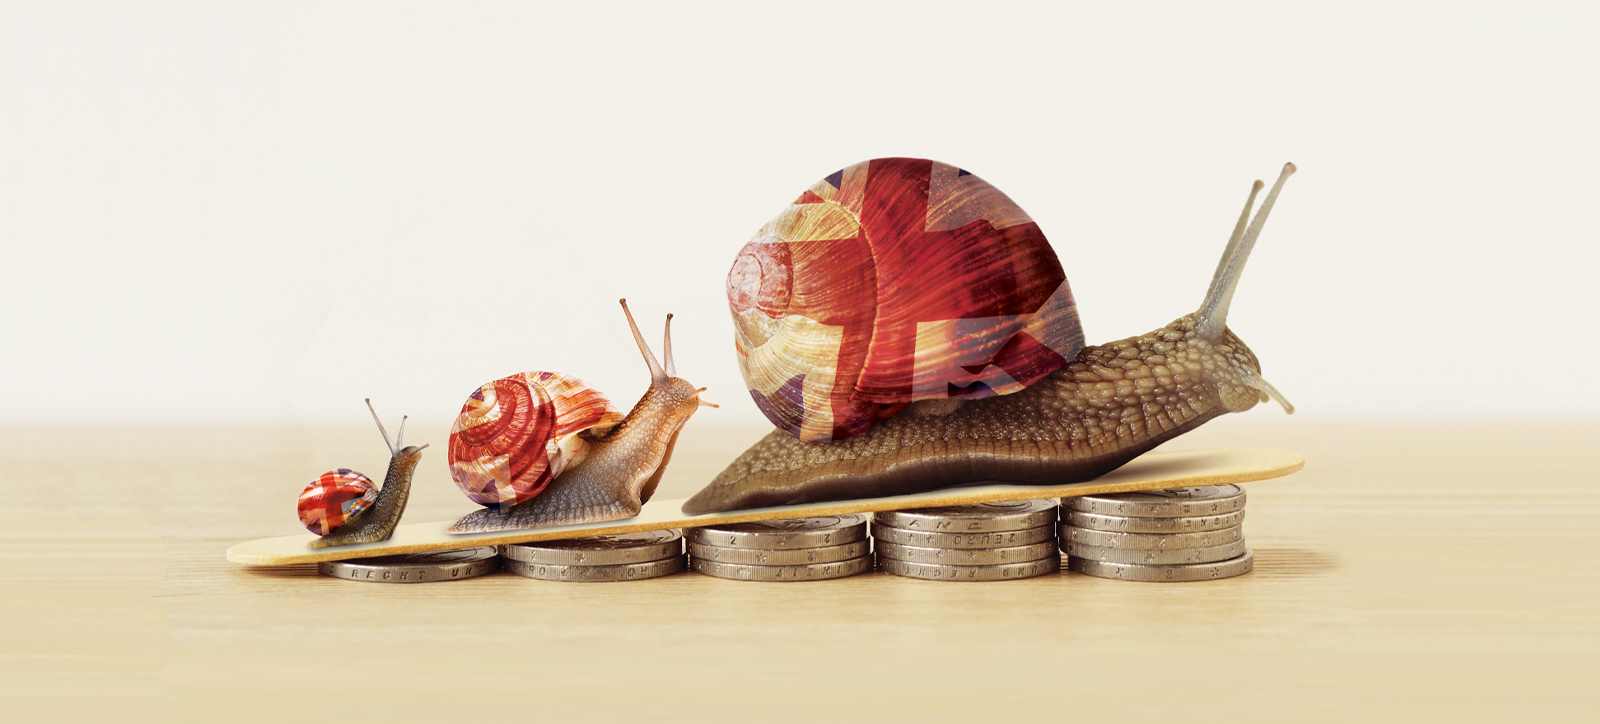 Three progressively larger snails with Union Jack flags on their shells climb a slope the is elevated by piles of pound coins (sterling).